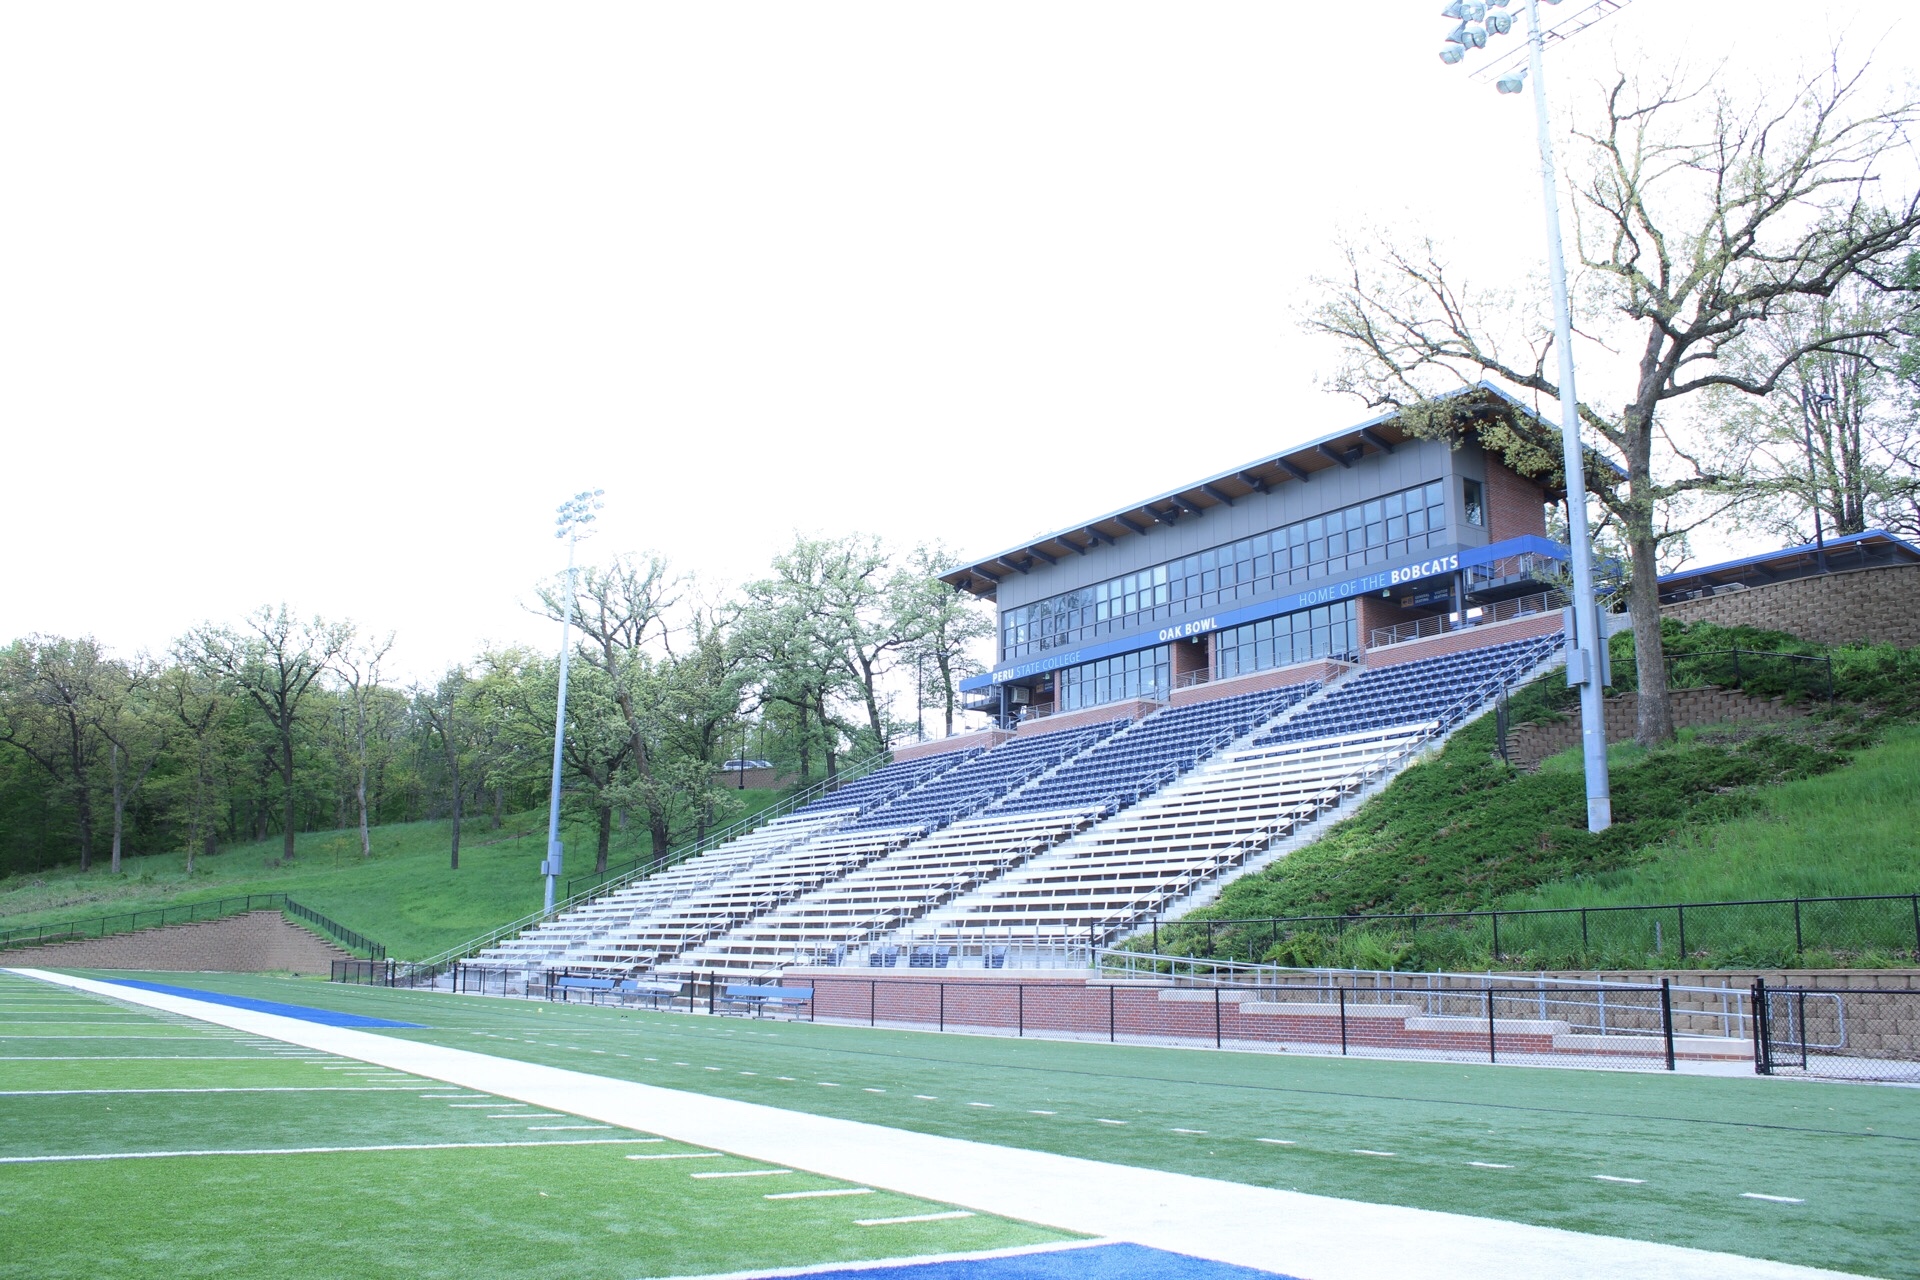 View of the Oak Bowl Stadium from the end zone.